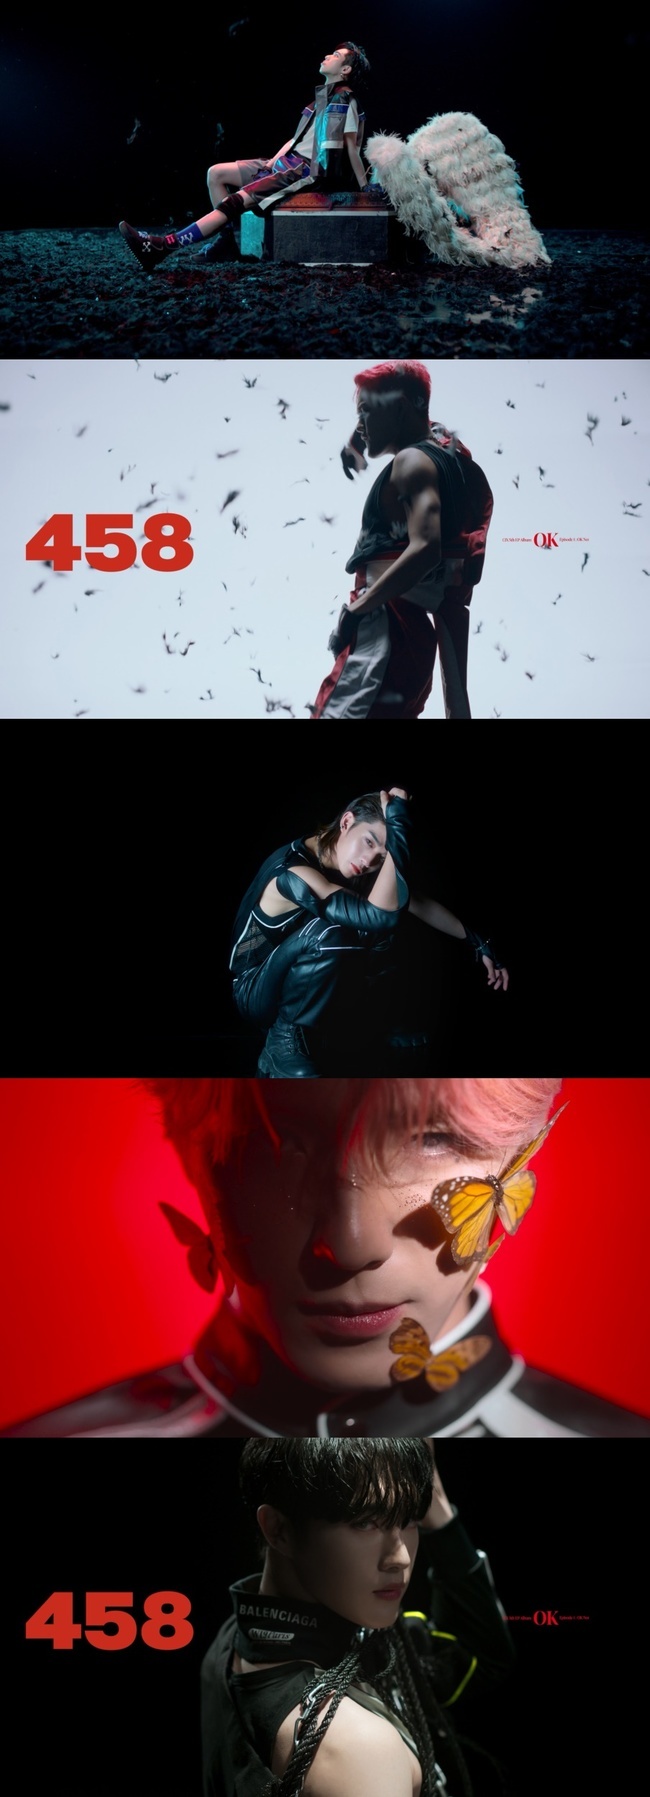 CIX (Mr. I-x) draws attention with its concept digestive power without Meru.CIX released a visual teaser for the fifth Mini album OK Episode 1: OK Not (OK Episode 1: OK Not) via official SNS from August 8 to 12.First, BX sat alone in an unknown space where black feathers were scattered, and emitted a heavy presence to the intense beat.Seung-hoon, who attempted to transform with a red hairstyle, impressed the fans with his provocative eyes and gestures, and Bae Jin Young also made it impossible to take a look at the provocative aura with all-black leather costumes while adding immersion.Yong-hee showed a dreamy aura with colorful butterfly decorations and makeup, and a calm melody that reversed the previous beat and the more brilliant visuals in close-up captivated the eyes and ears at the same time.Hyun Seok emanated a charisma that penetrates the screen with his aggressive eyes and pose.CIX is concentrating its attention on global fans with its visual and concept digestion power.Especially, the colorful beat that expects CIXs unique performance is raising the expectation of comeback and bringing out the enthusiastic response of fans.CIXs fifth mini album OK Episode 1: OK Not is an album about the troubles of finding the essence of love.Four songs were included, including the title song 458, Without You, Bend the Rules and Drown in Luv.OK Episode 1: OK Not will be released on various music sites at 6 pm on the 22nd.